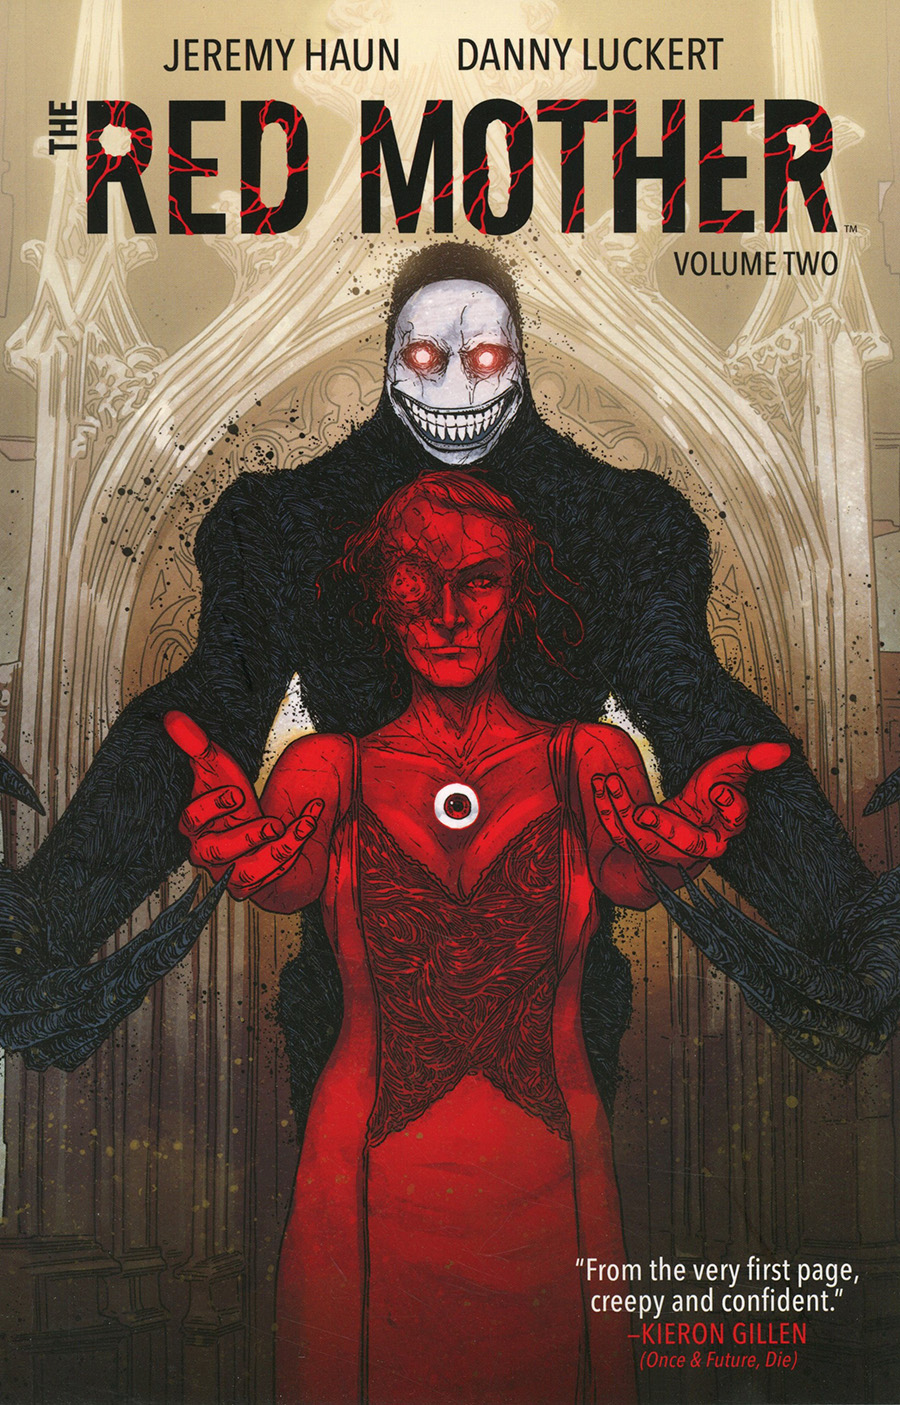 Red Mother Vol 2 TP